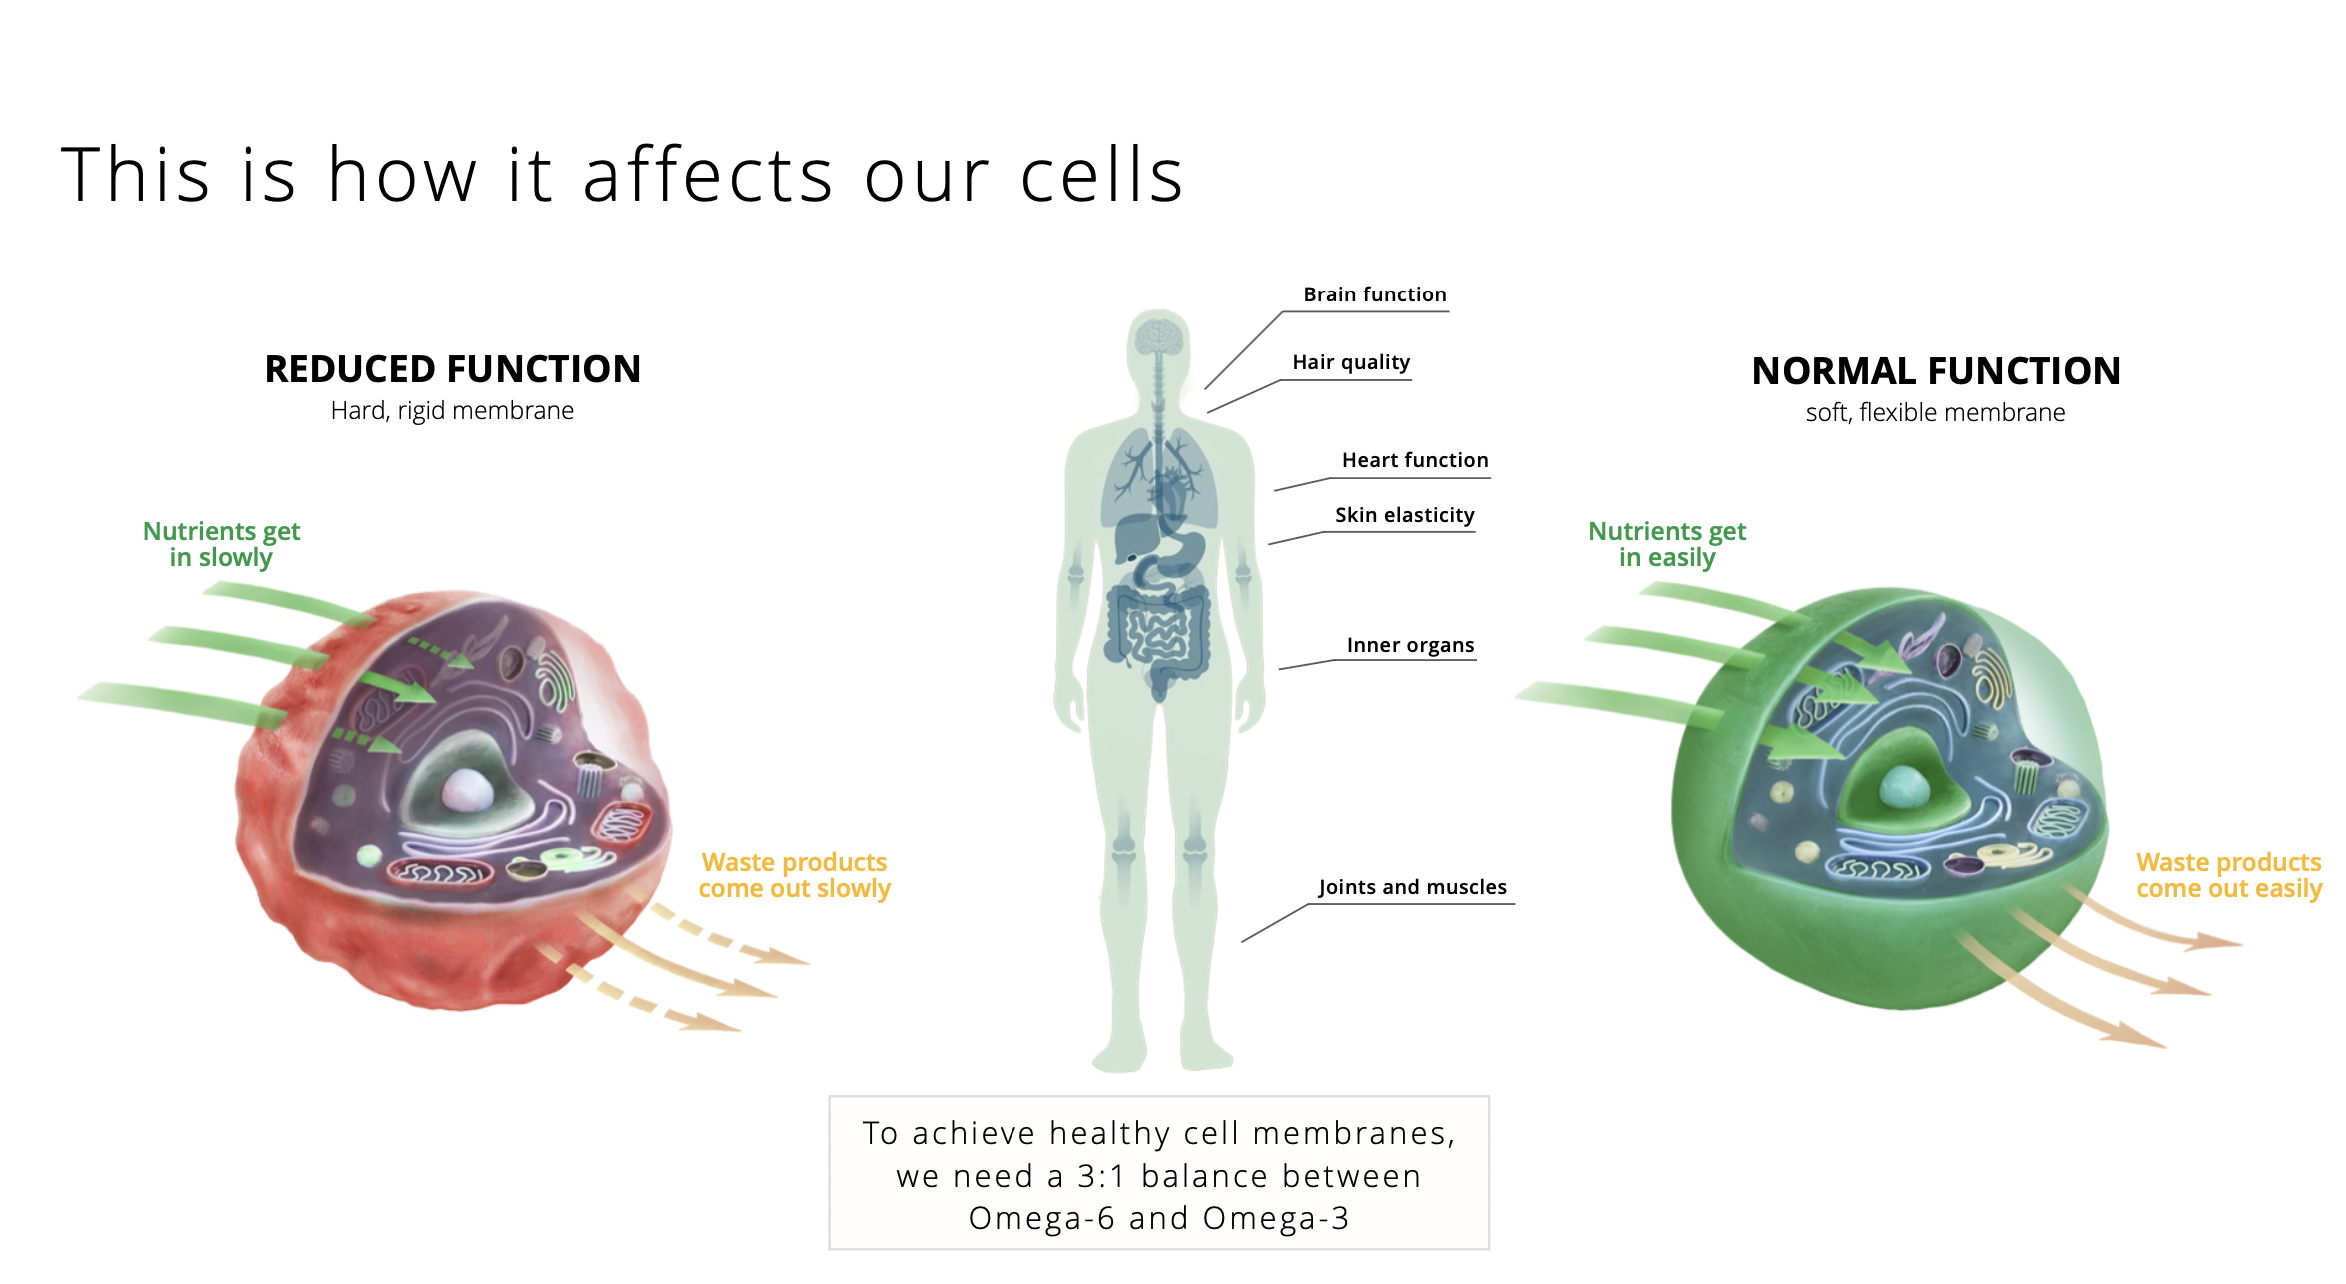 How it affects our cells